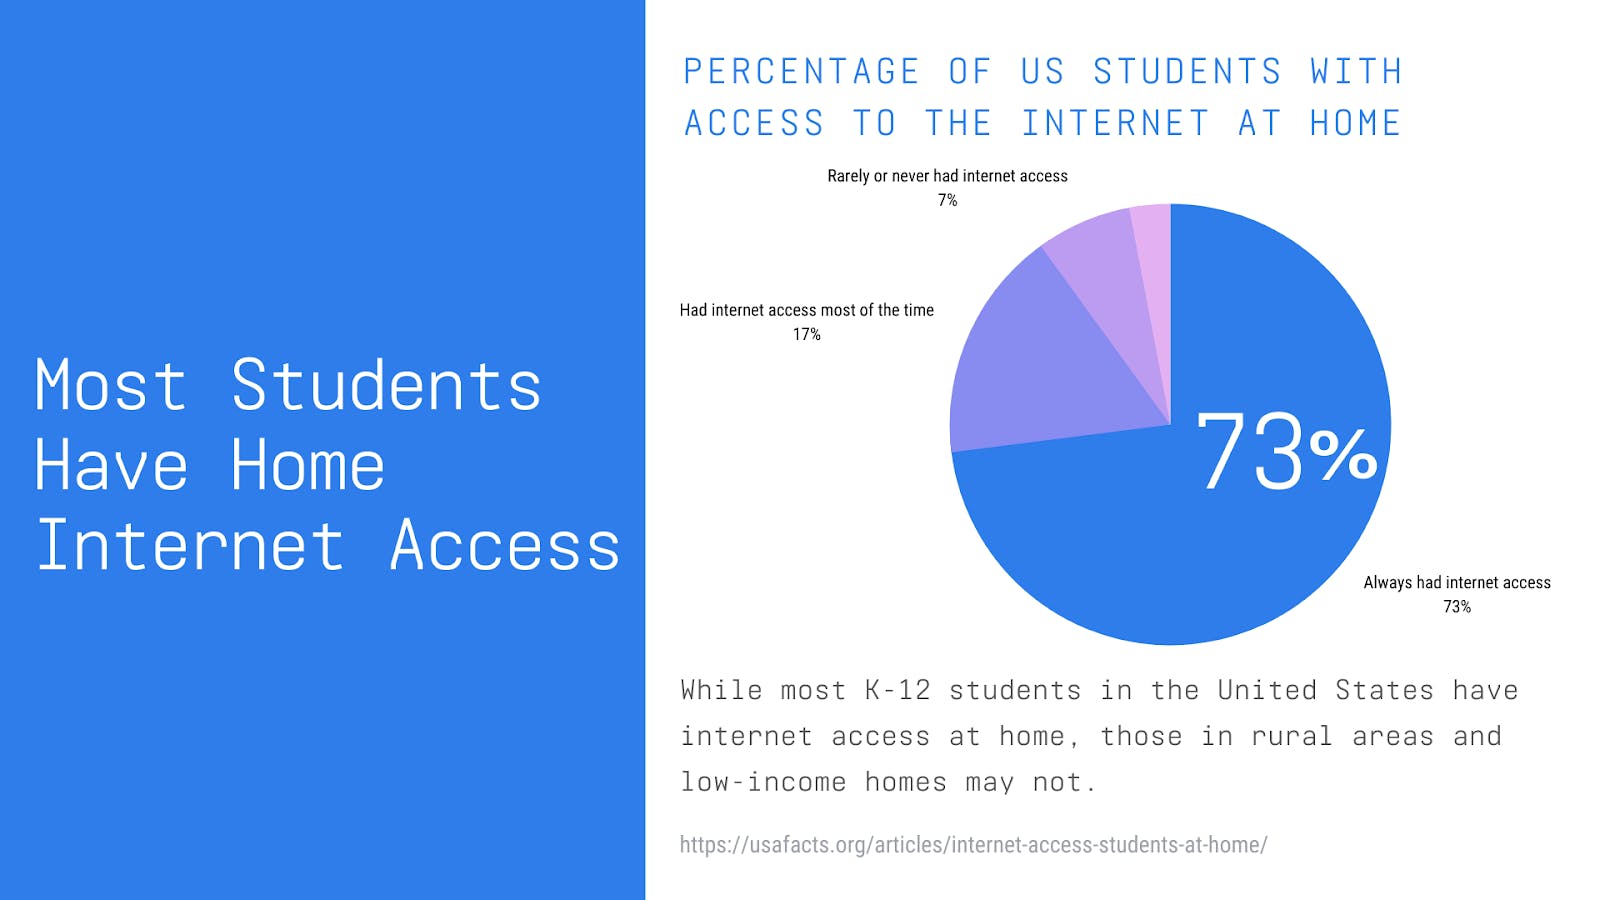 pie chart showing that 73% of US students have consistent home internet access